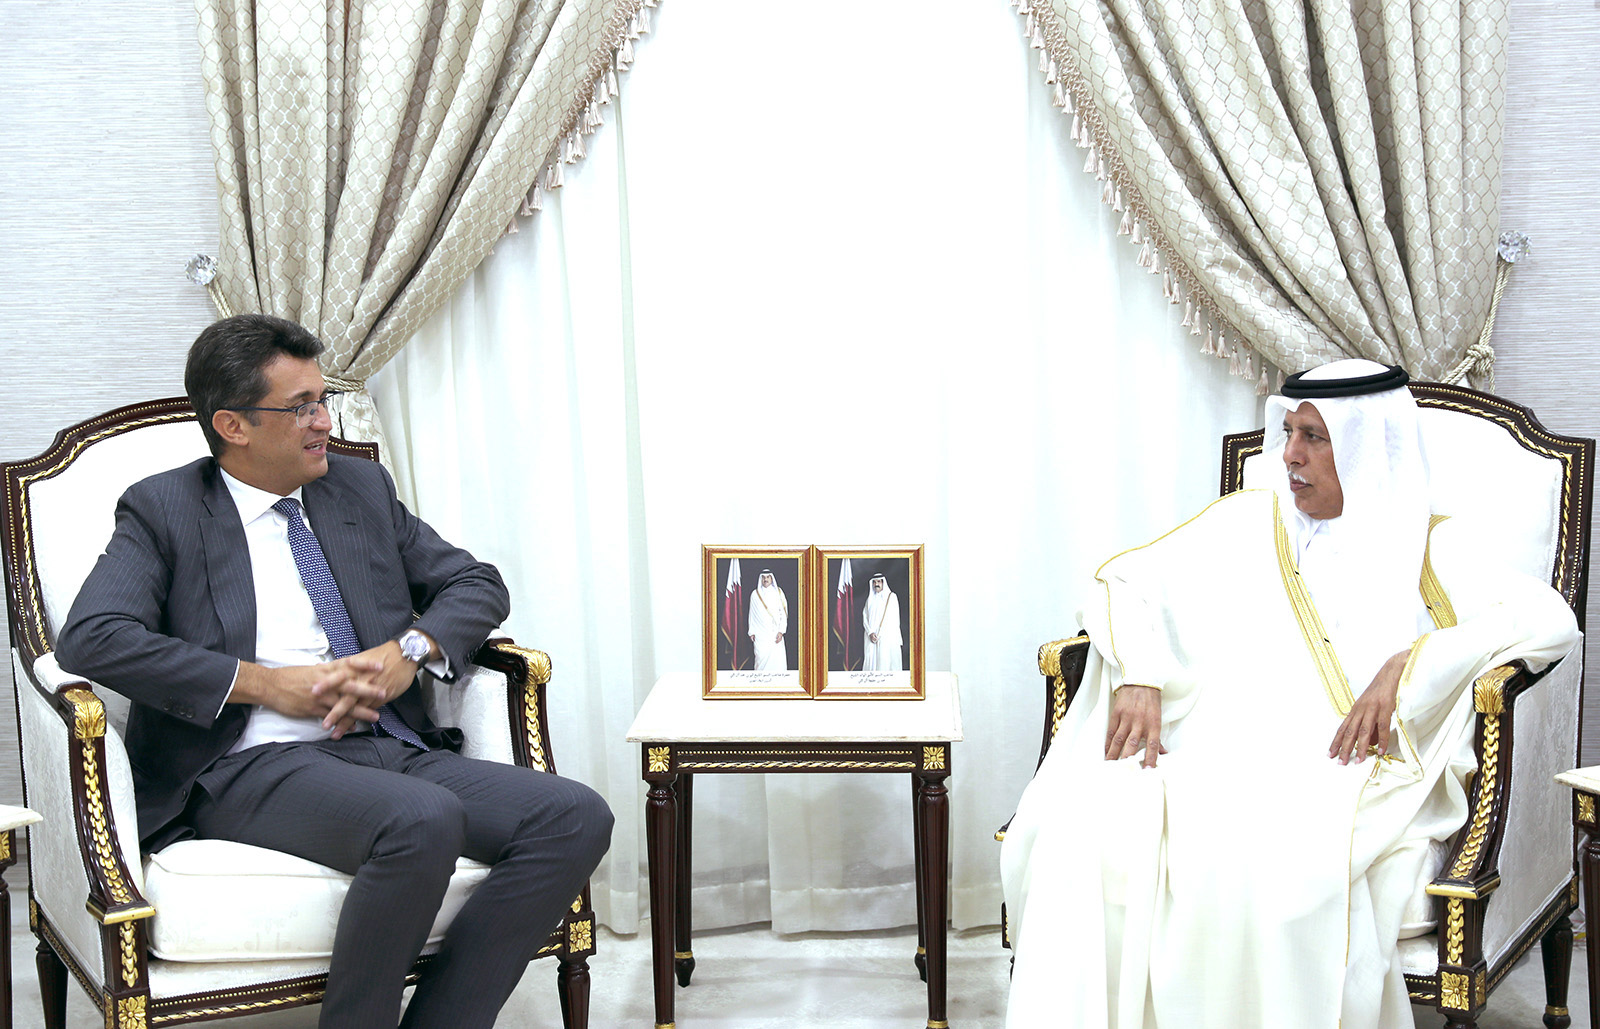 The Speaker of the Shura Council meets with the President of the European Union Delegation to Qatar